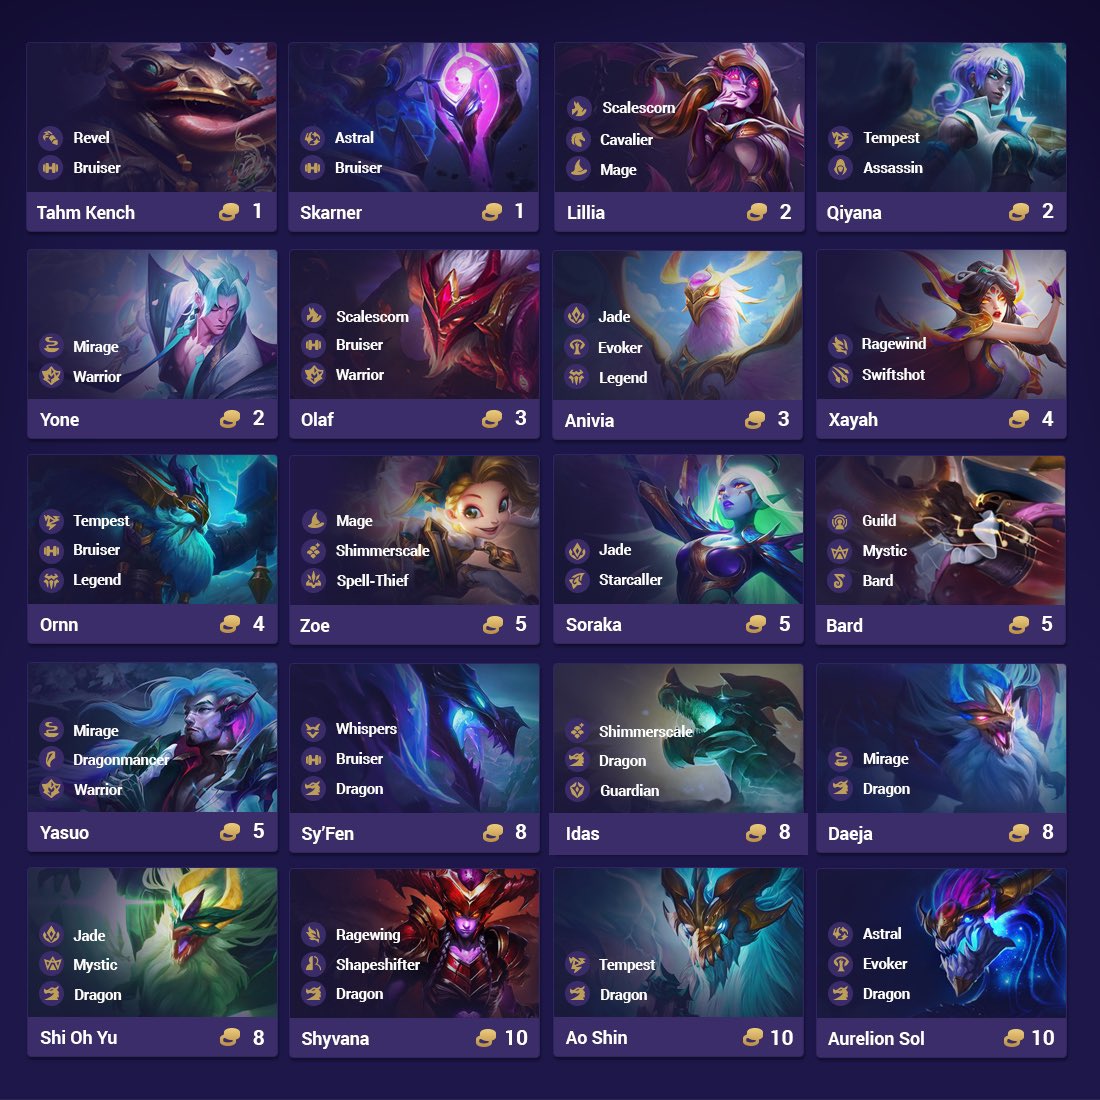 Mobalytics on Twitter: "Here are some of the many new champions in @TFT Set 7. 🐉 Visit link below see everything that's new! ▶️ https://t.co/EdaKTRUrNu https://t.co/3ewnTnBr5j" / Twitter